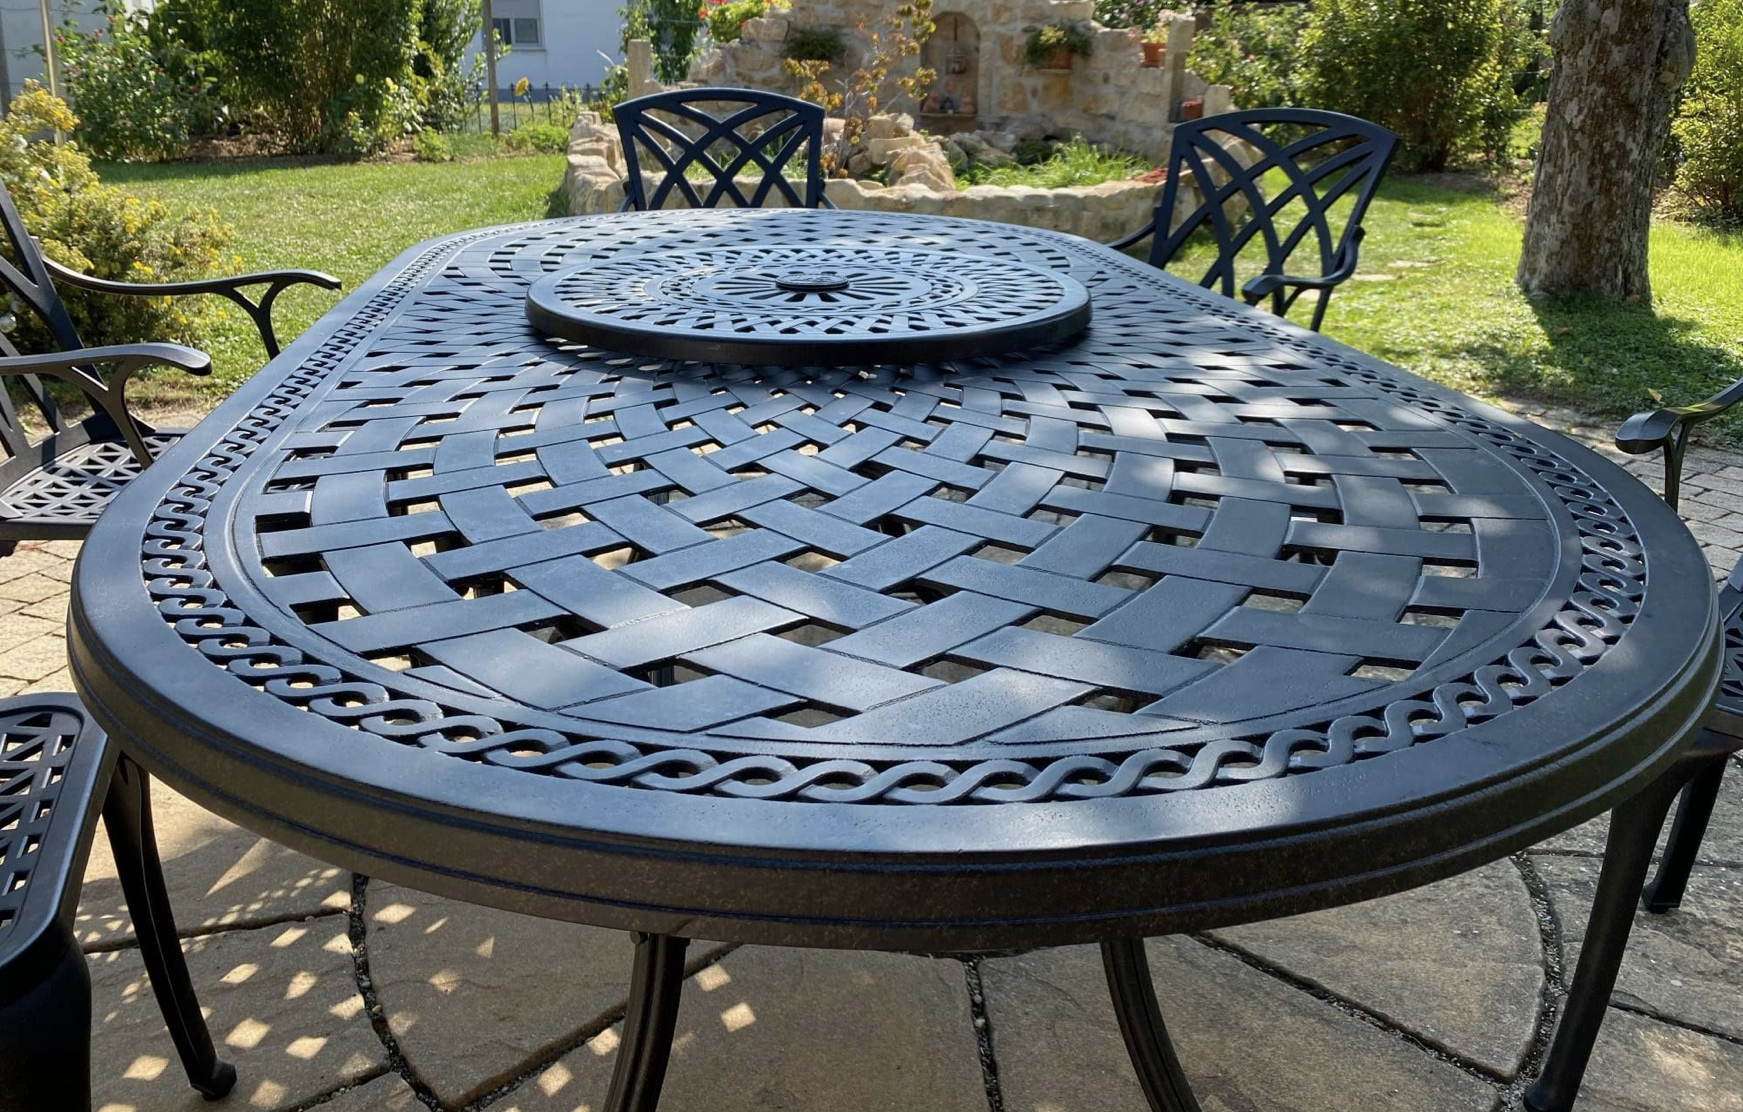 Our 60cm Lattice Lazy Susan on our Oval June Garden Table